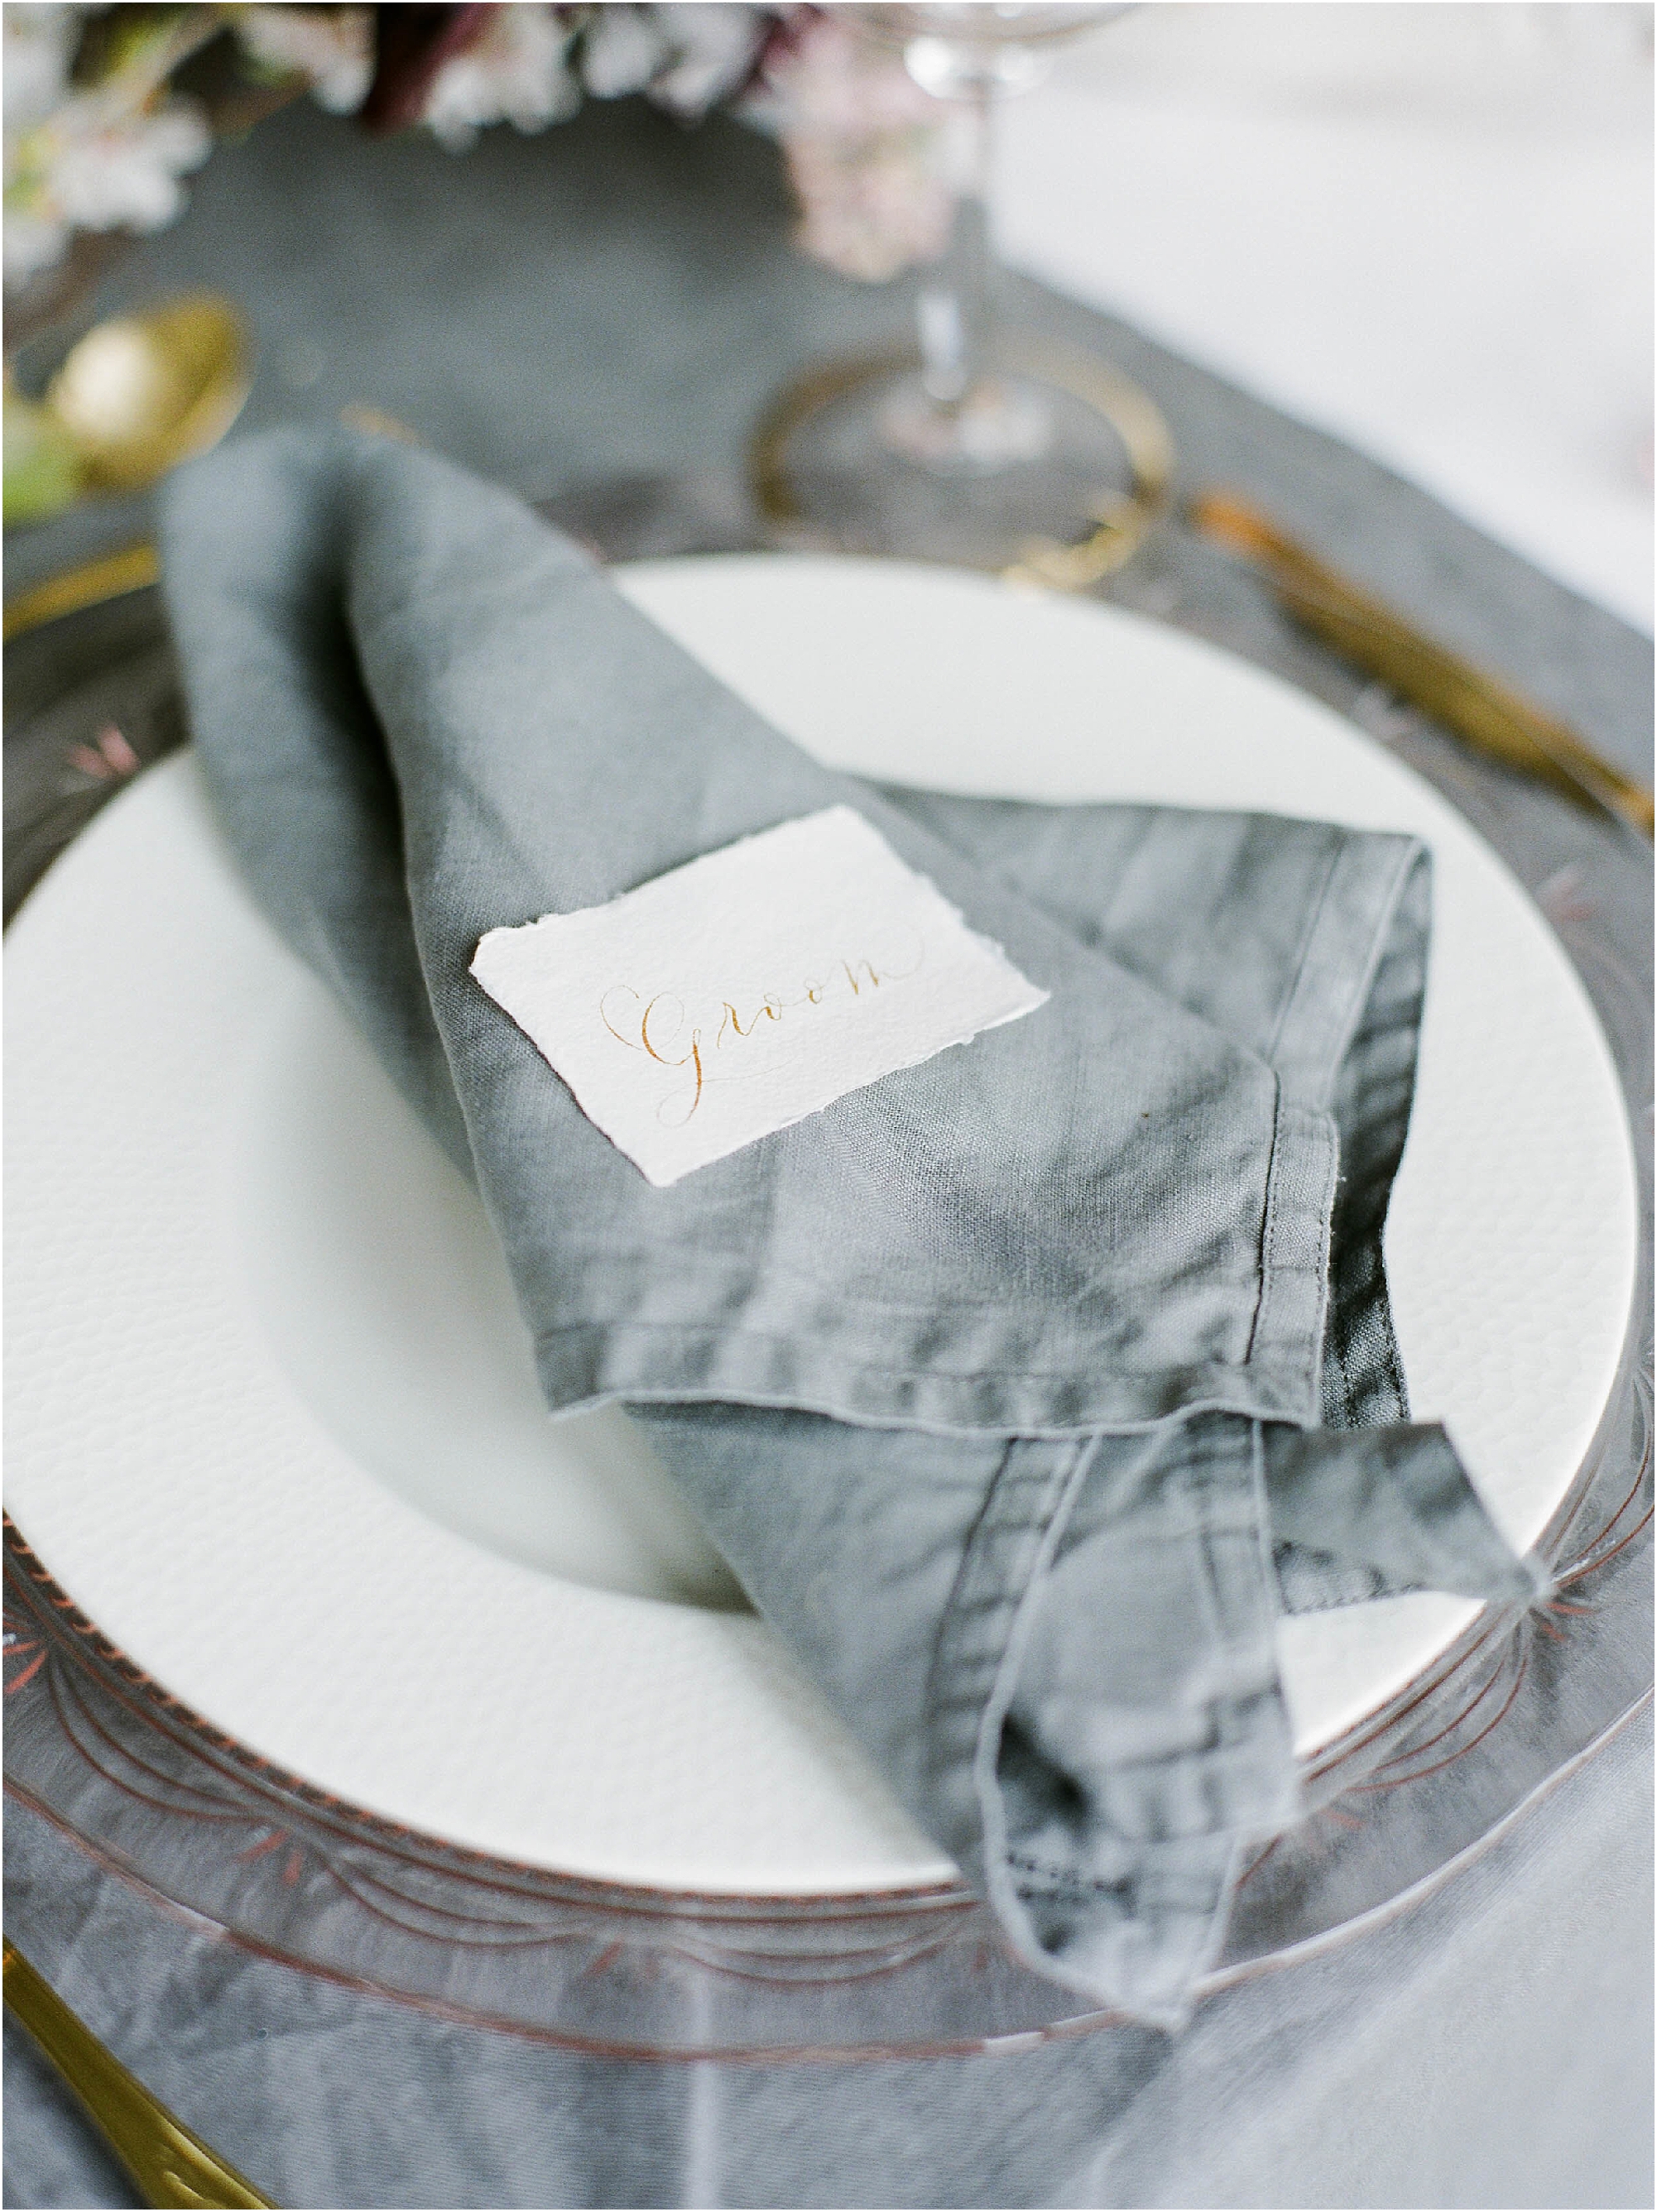 Groom table place name on grey linen napkin